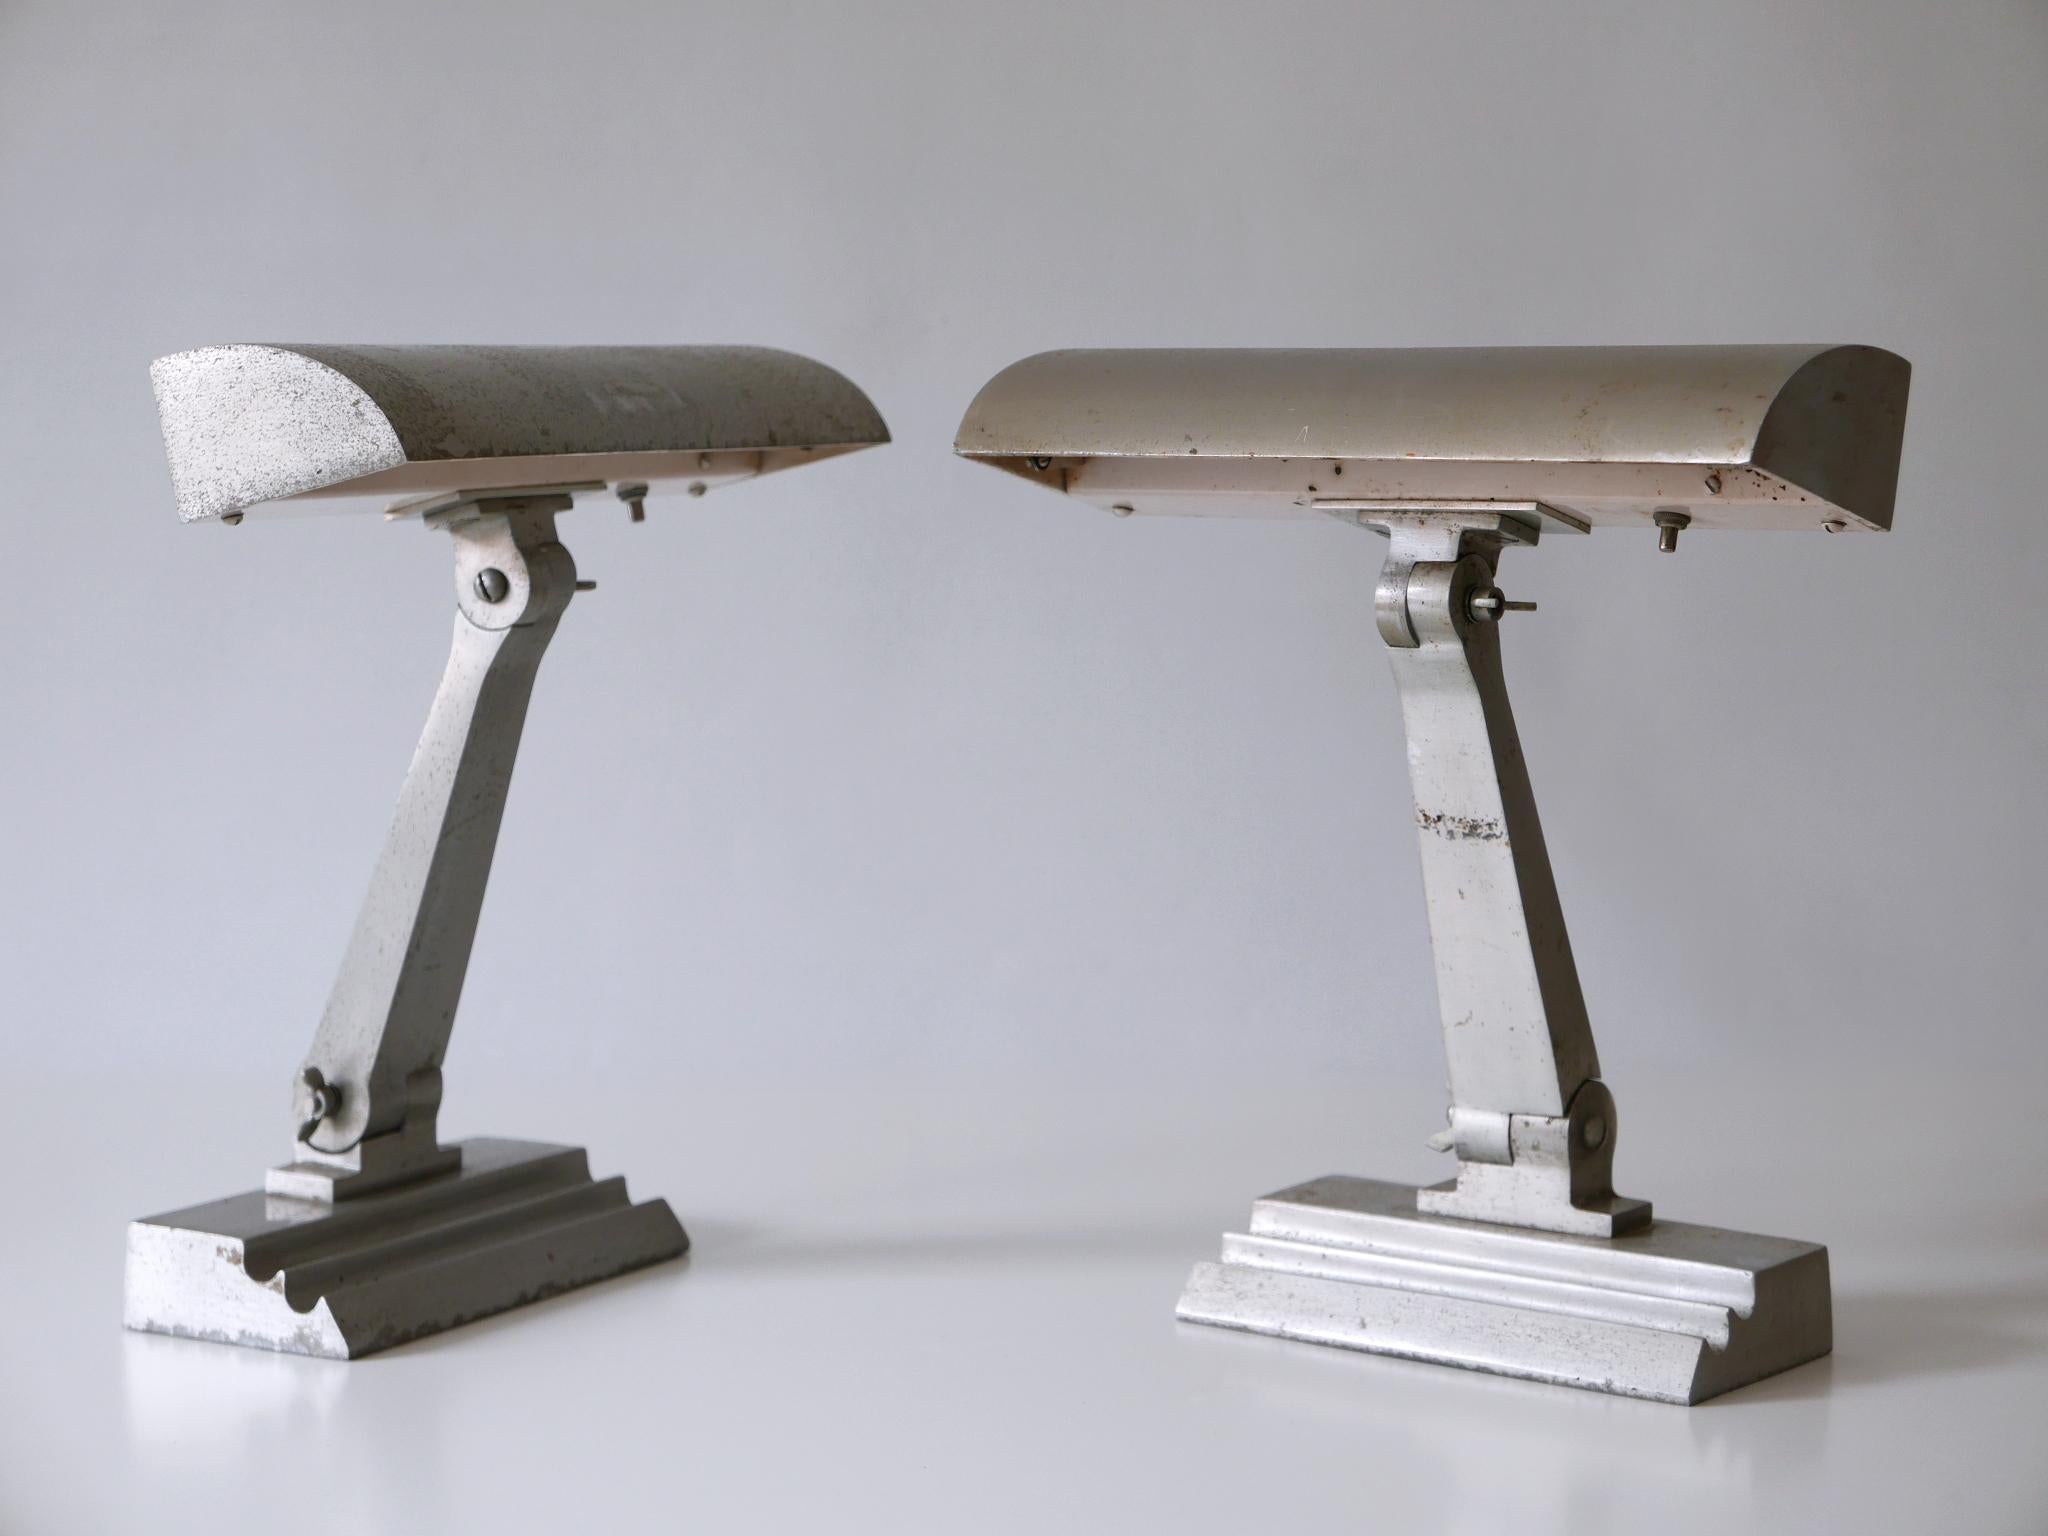 Set of Two Rare Art Deco Desk or Table Lamps from an US Cruiser Ship, 1920s In Good Condition For Sale In Munich, DE